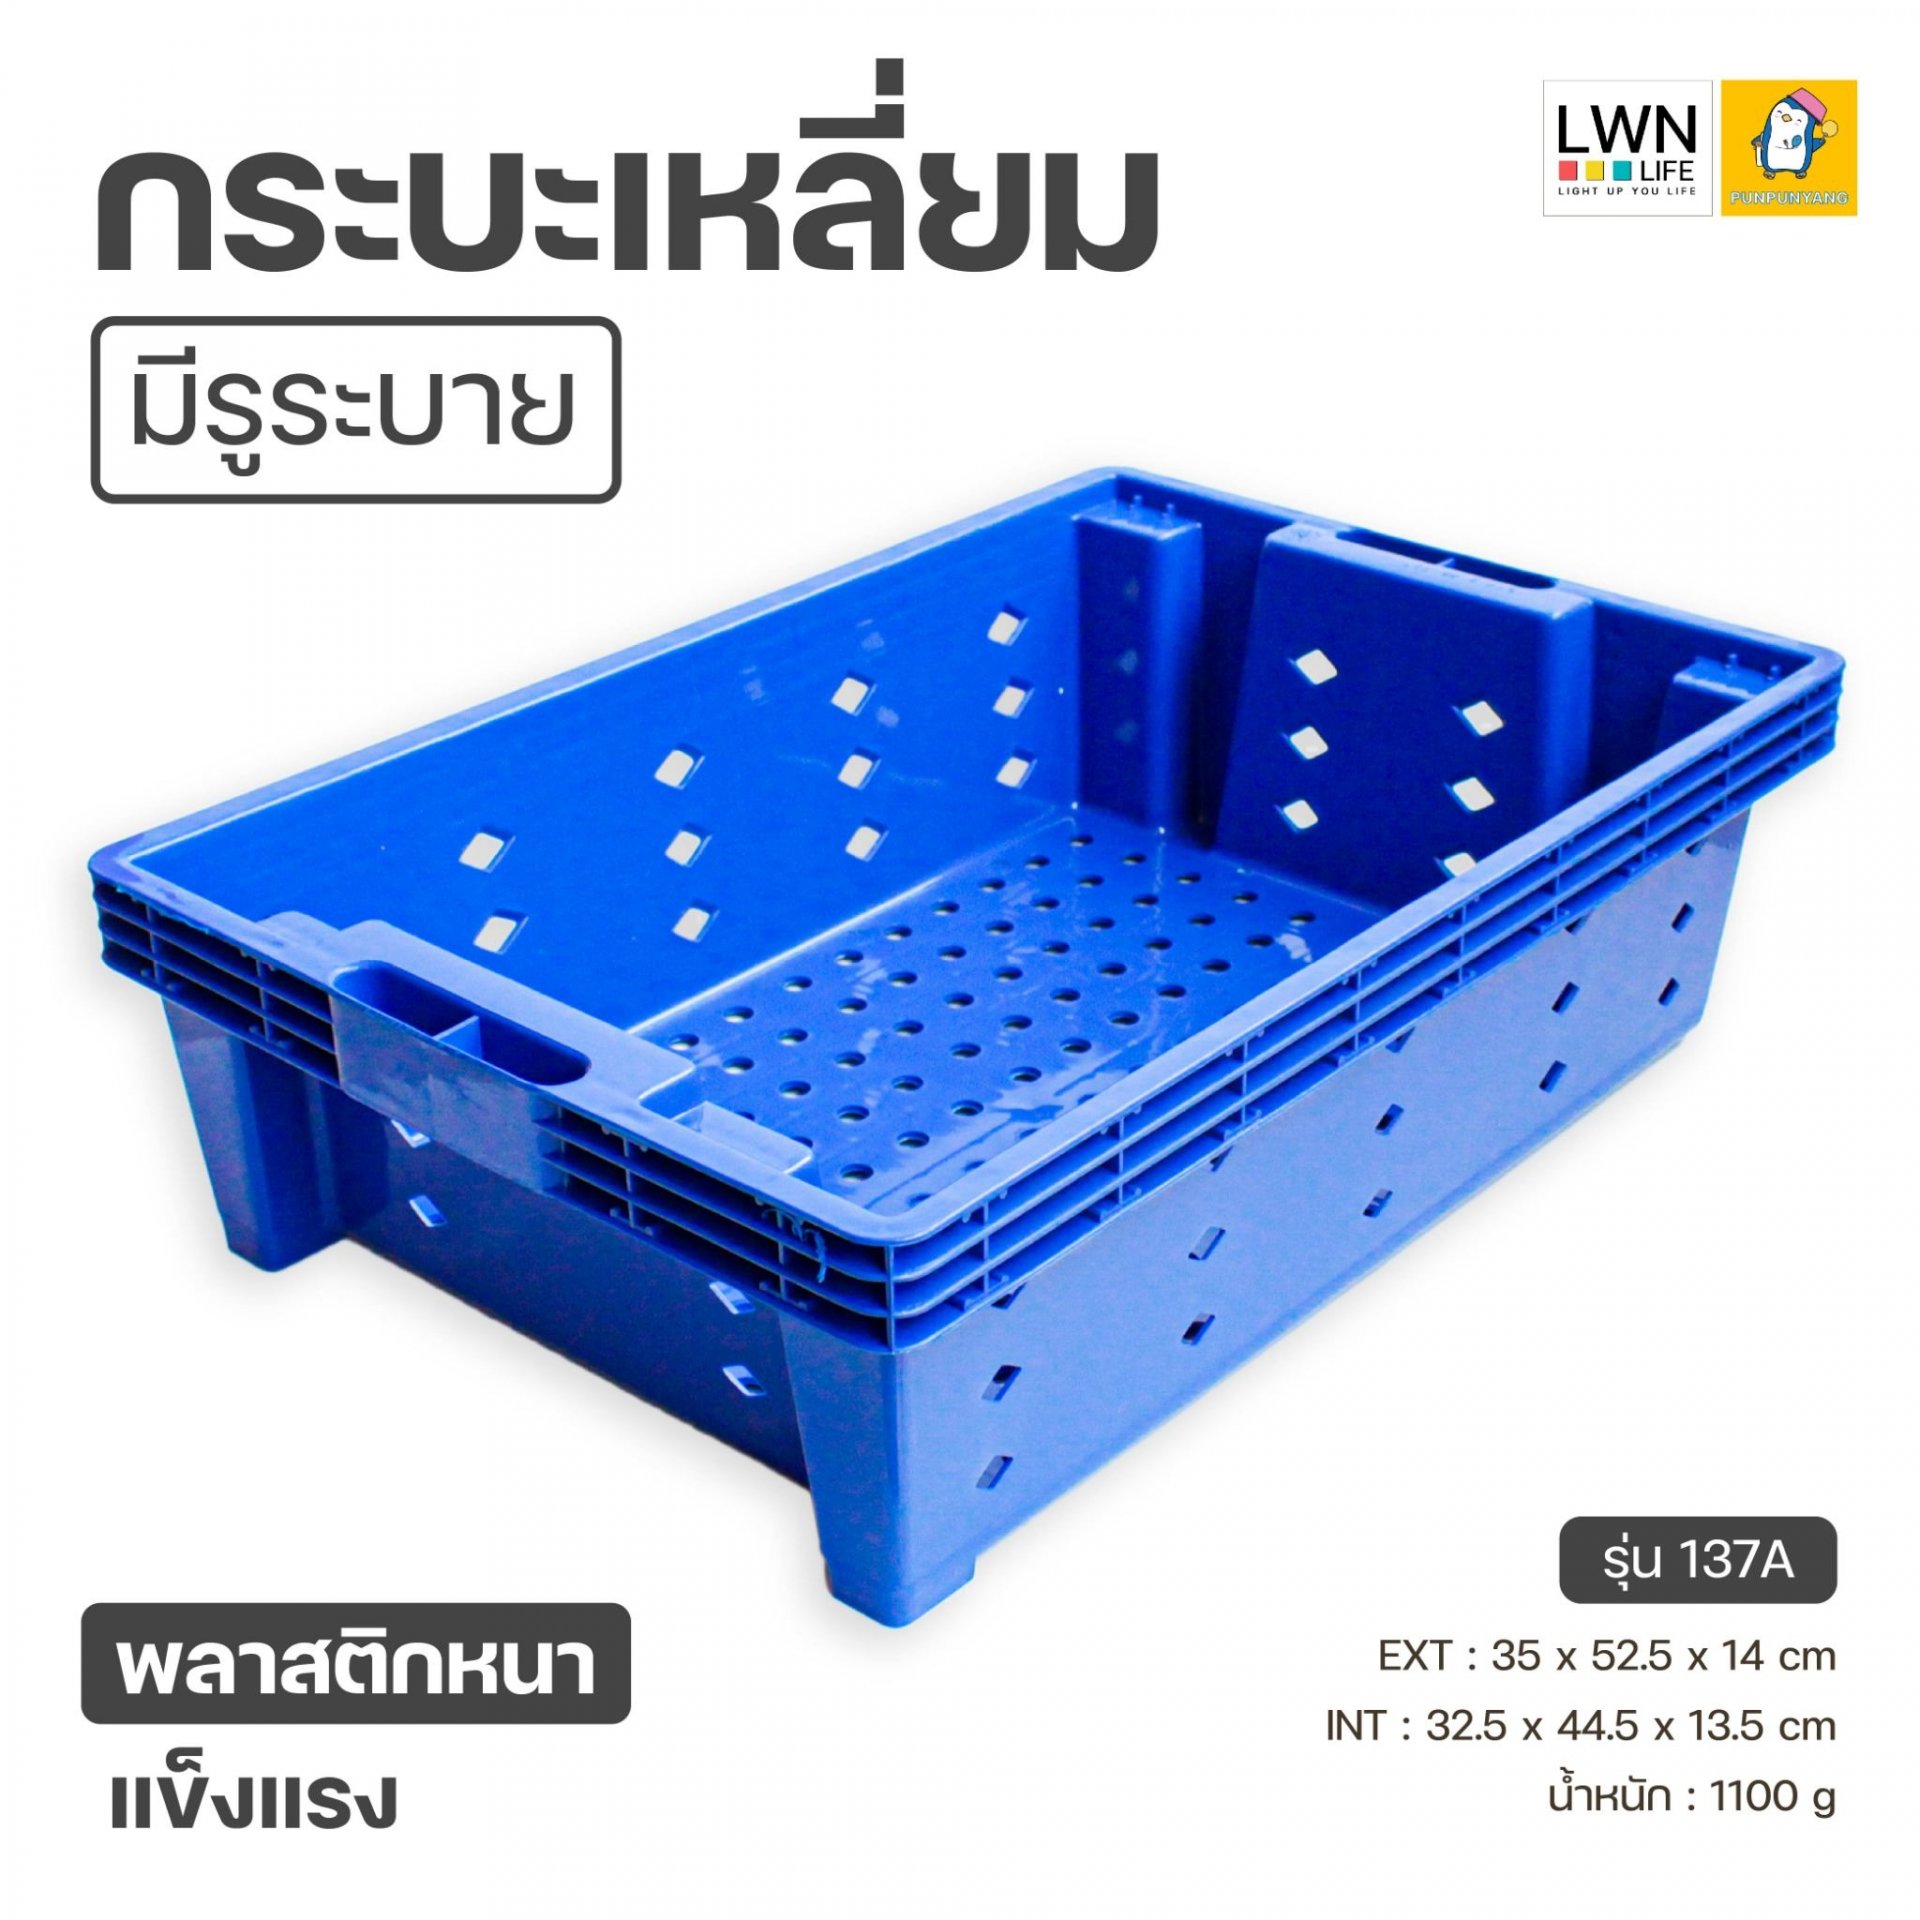 No.137 stackable rectangular plastic tray with holes - lwnlife